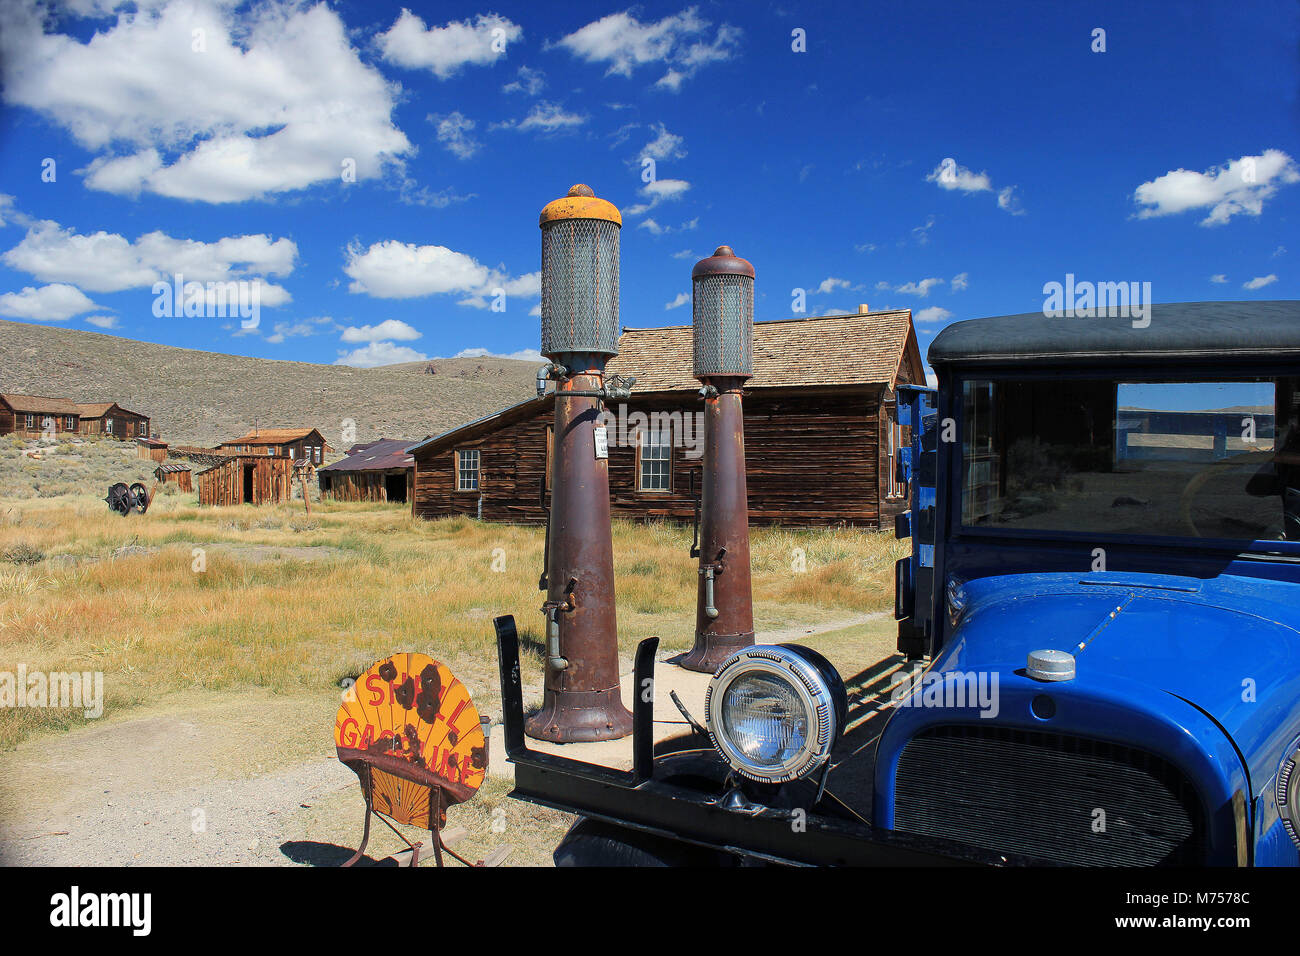 Bodie California Ghost Town Stock Photo